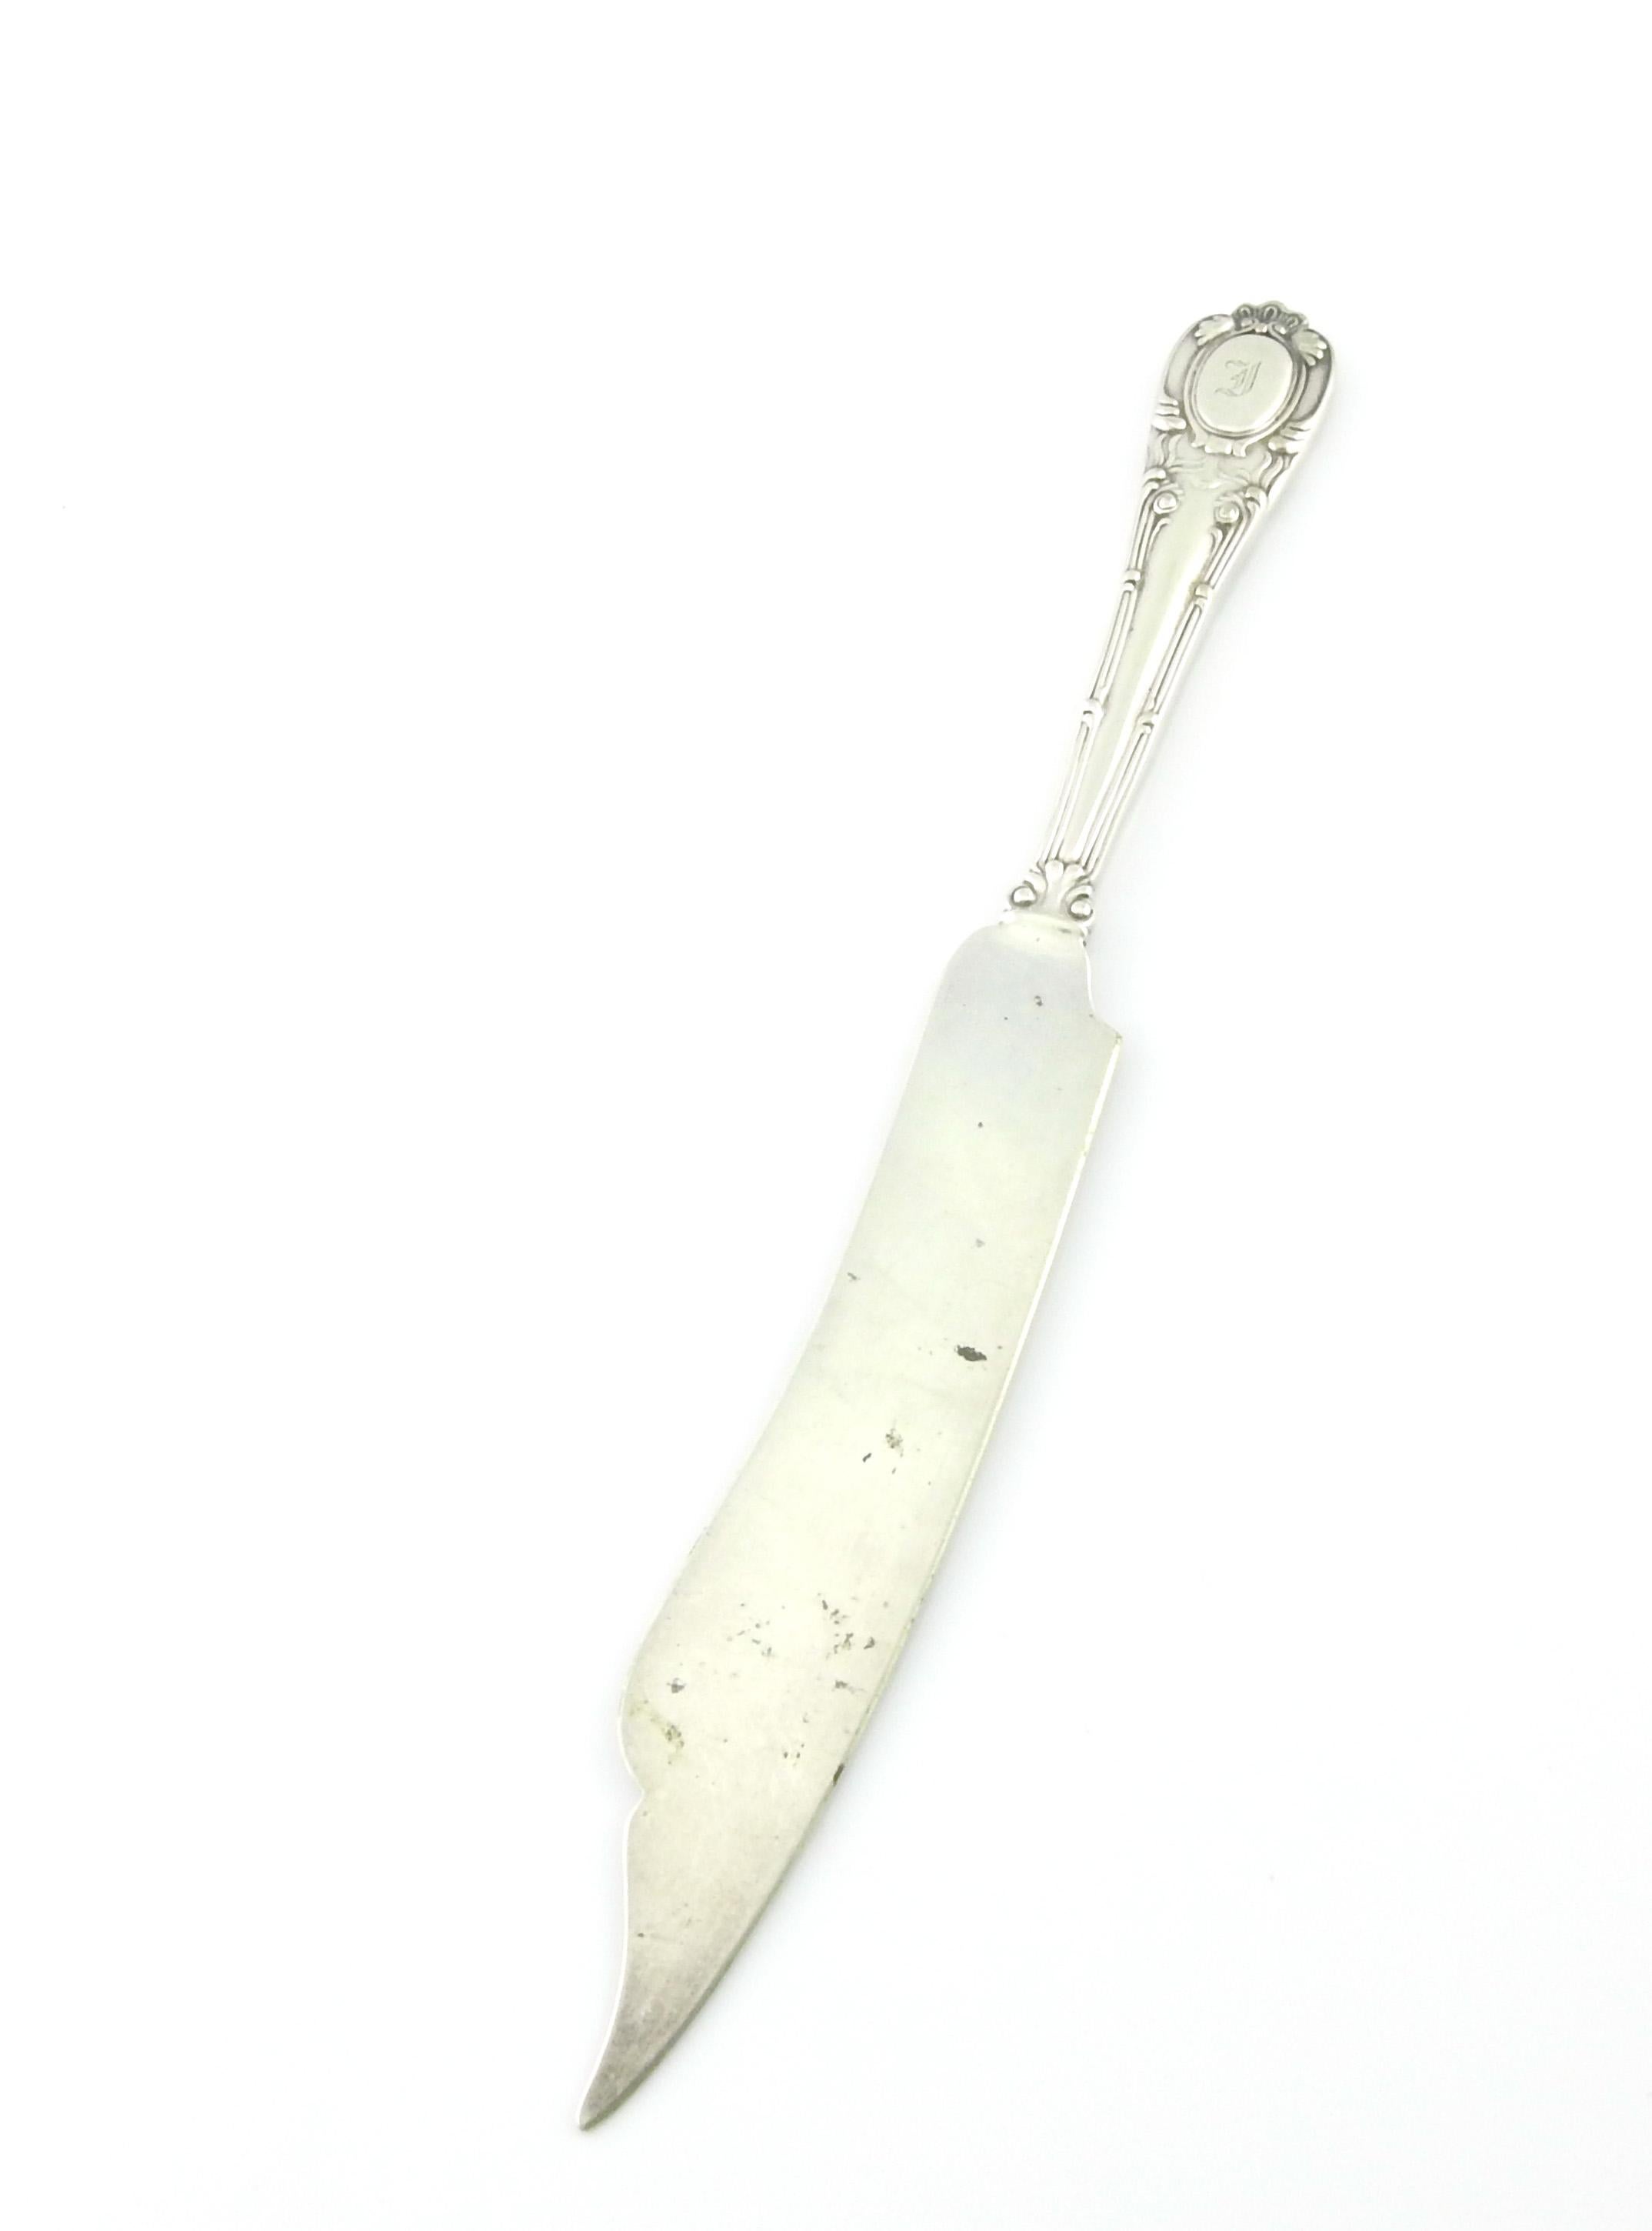 Tiffany & Co Silver Plate Old French Fish Knife 1